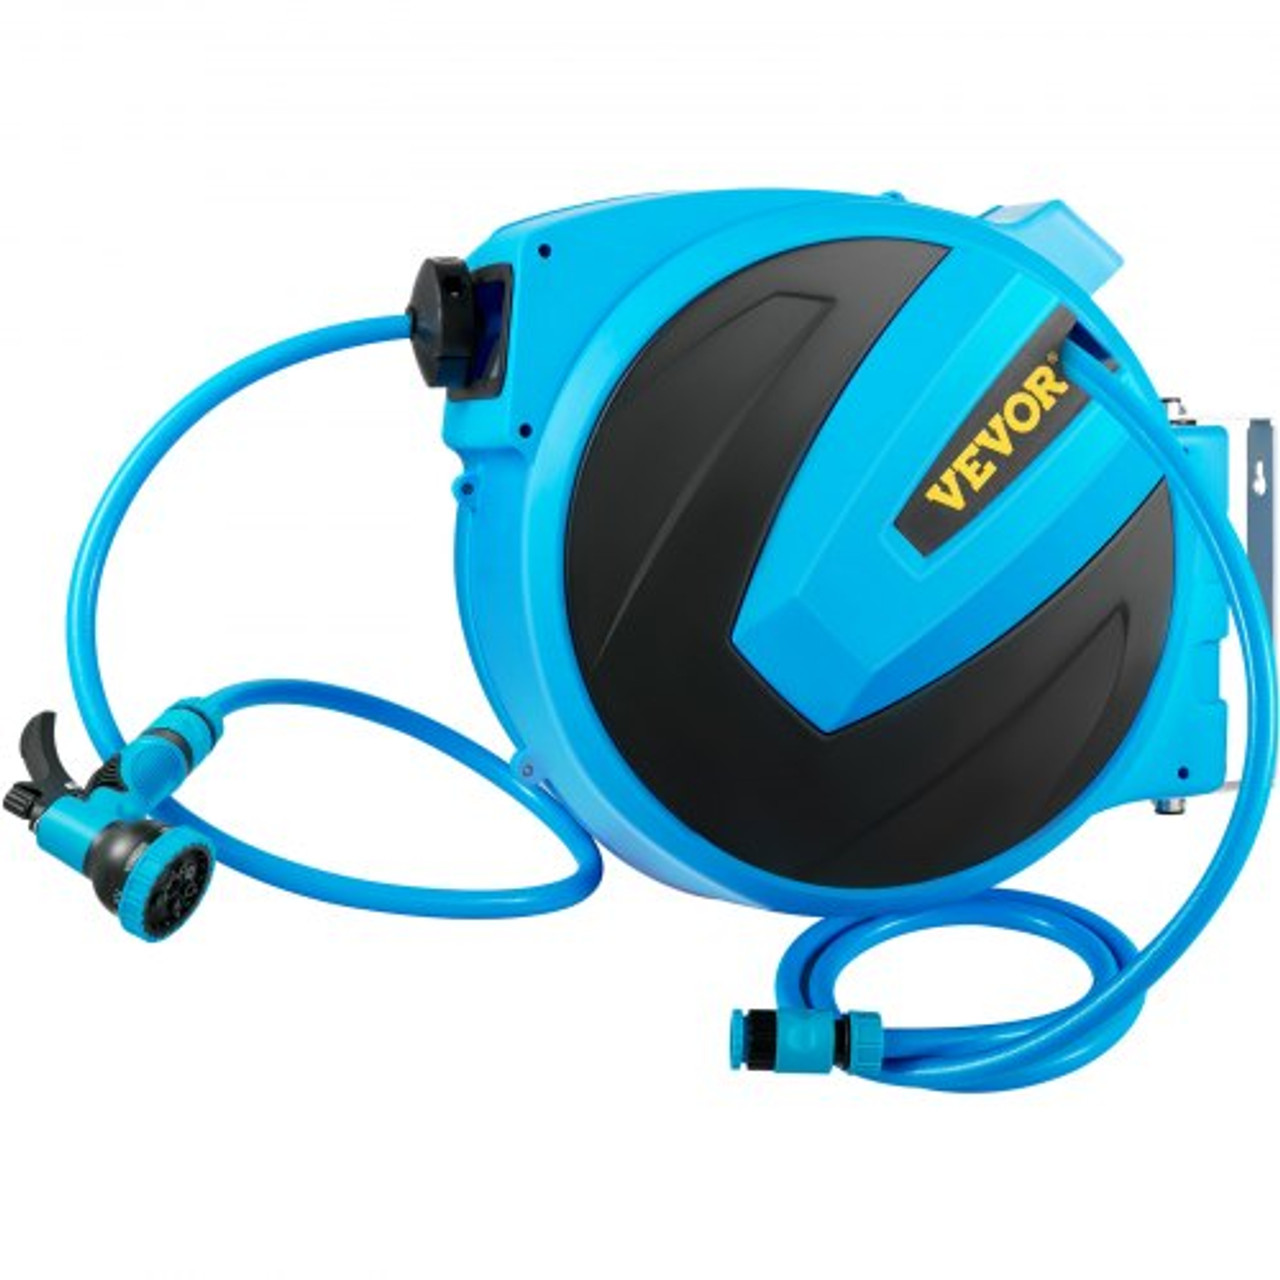 Retractable Hose Reel, 1/2 inch x 75 ft, Any Length Lock